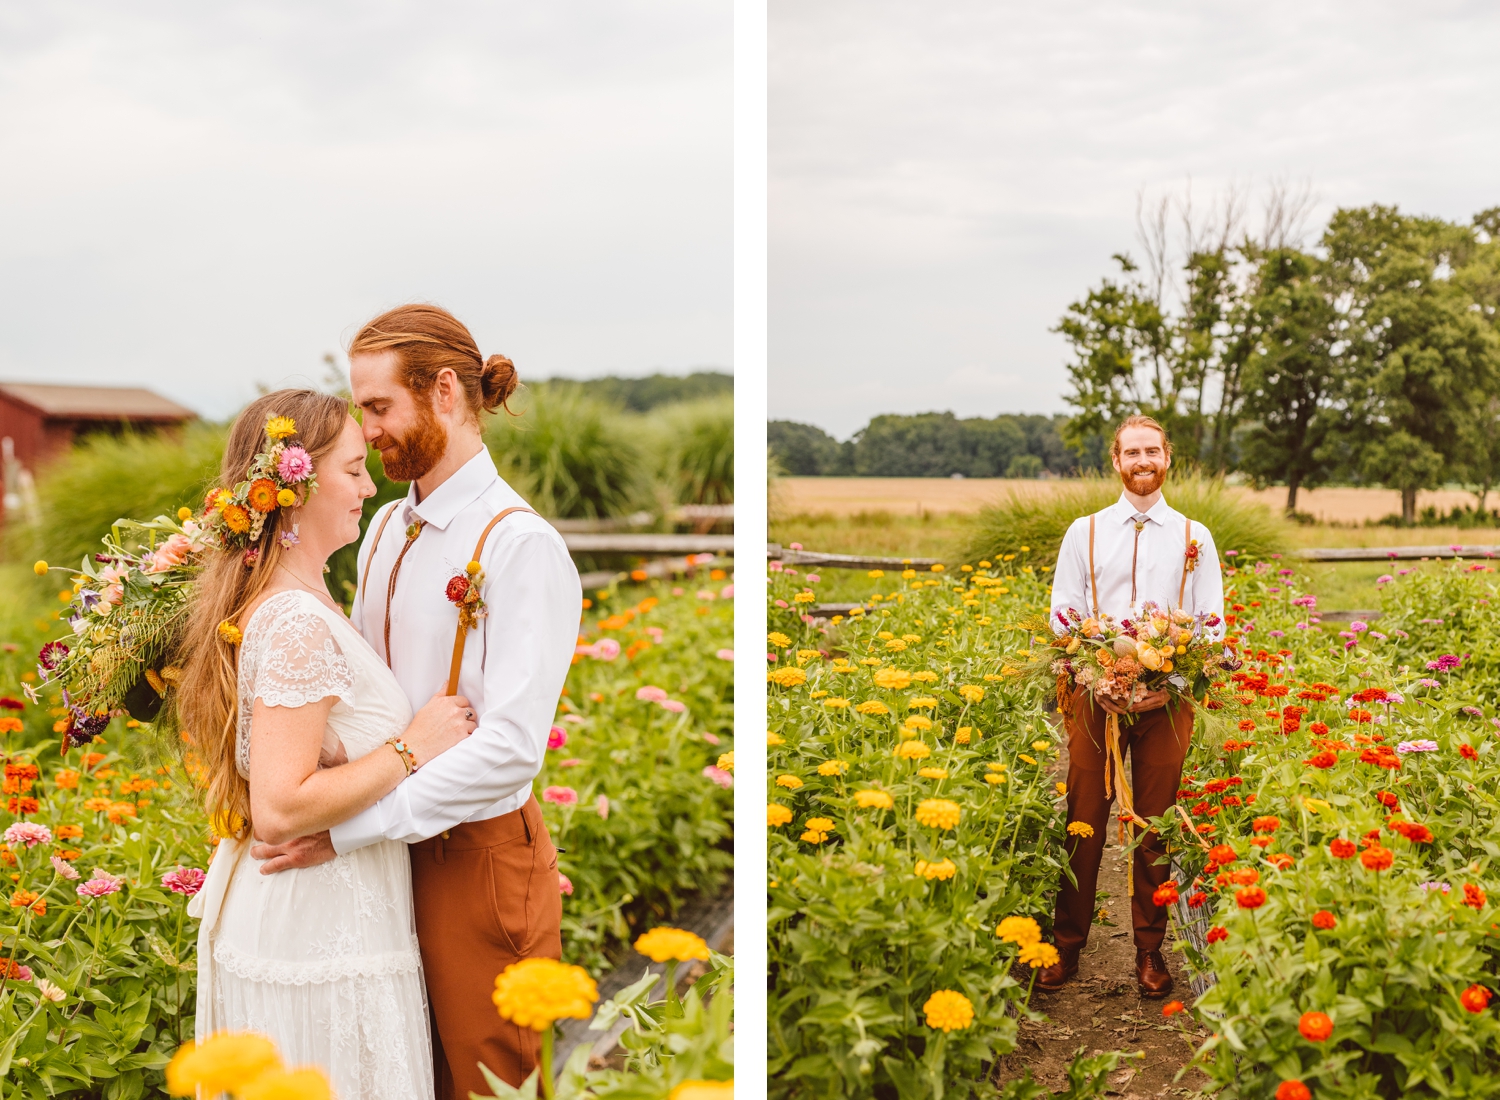 Bride and groom standing in flower field | groom holding bouquet in flower field | Brooke Michelle Photography